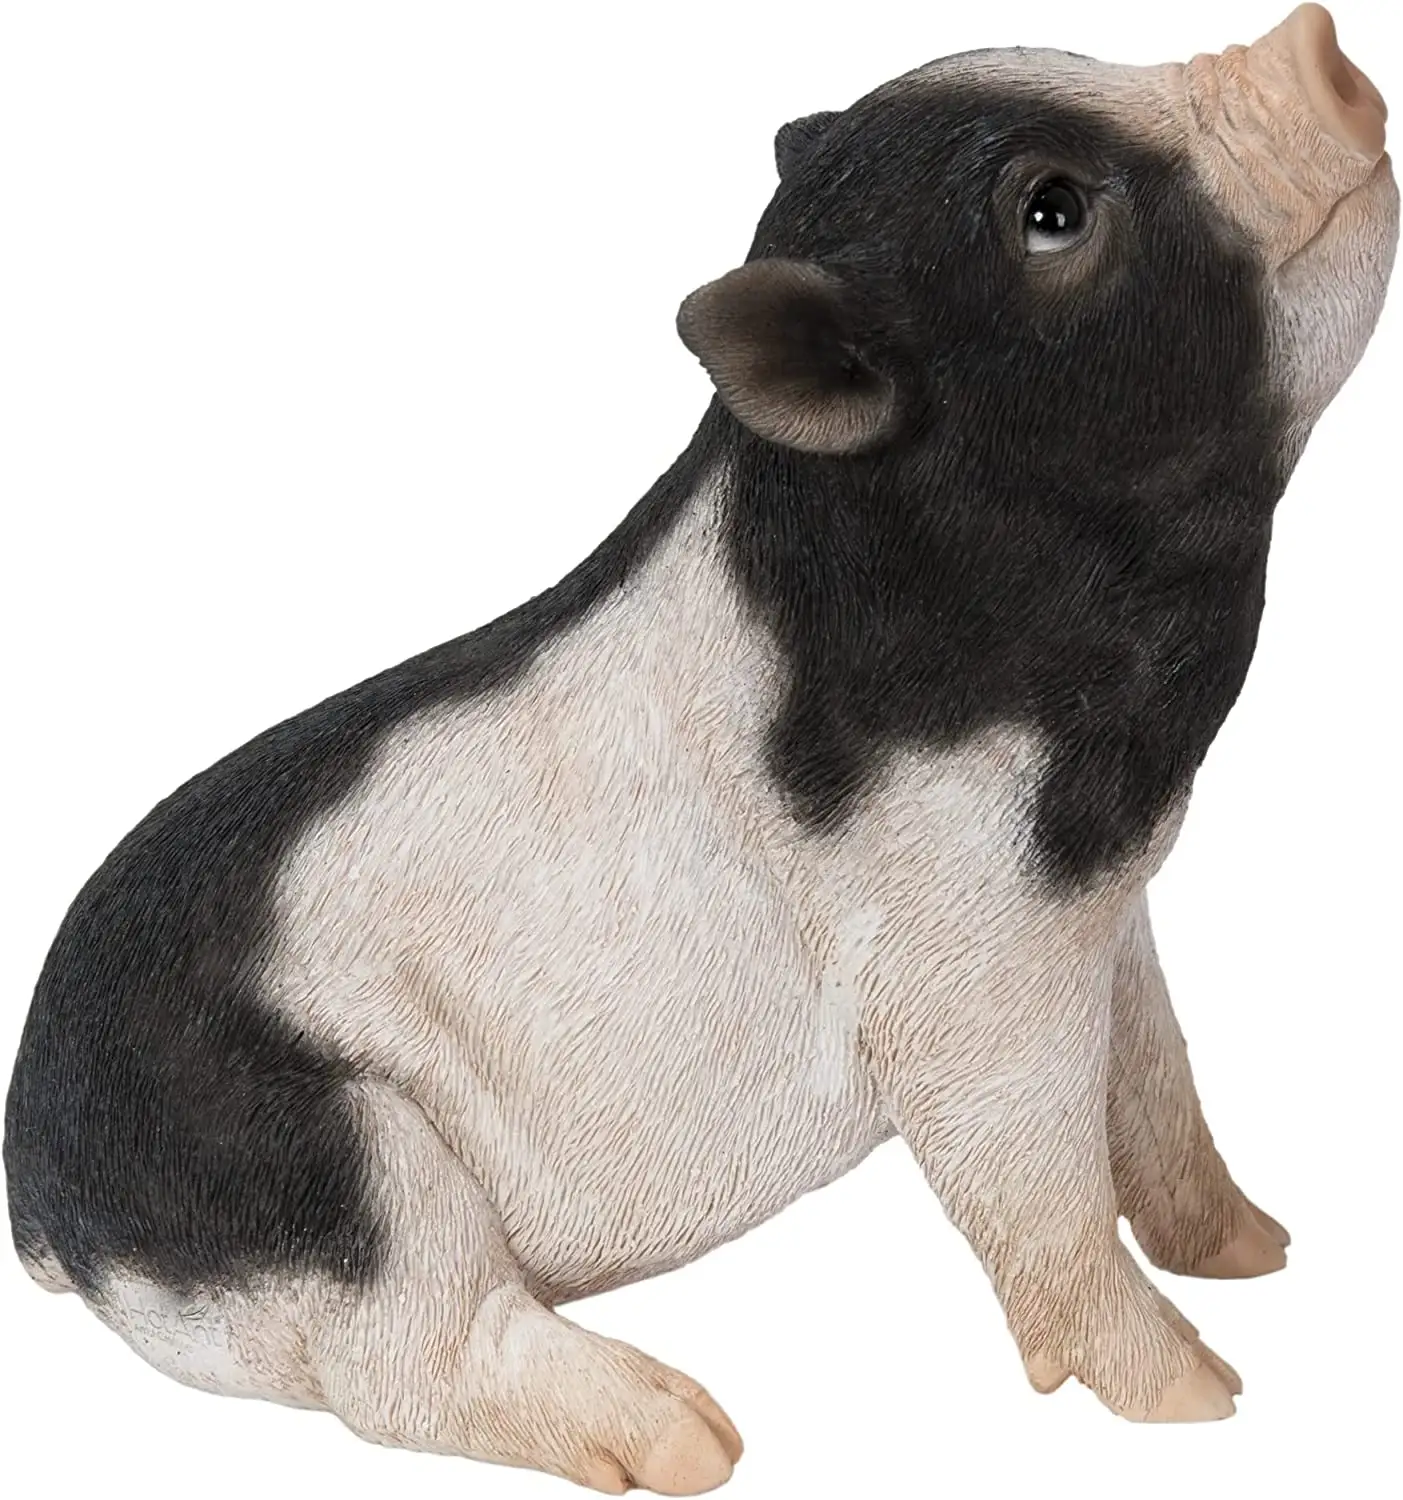 Lifelike Resin Home Decoration Crafts Gift Ornaments Black and White Little Sitting Pig for Pig Lovers